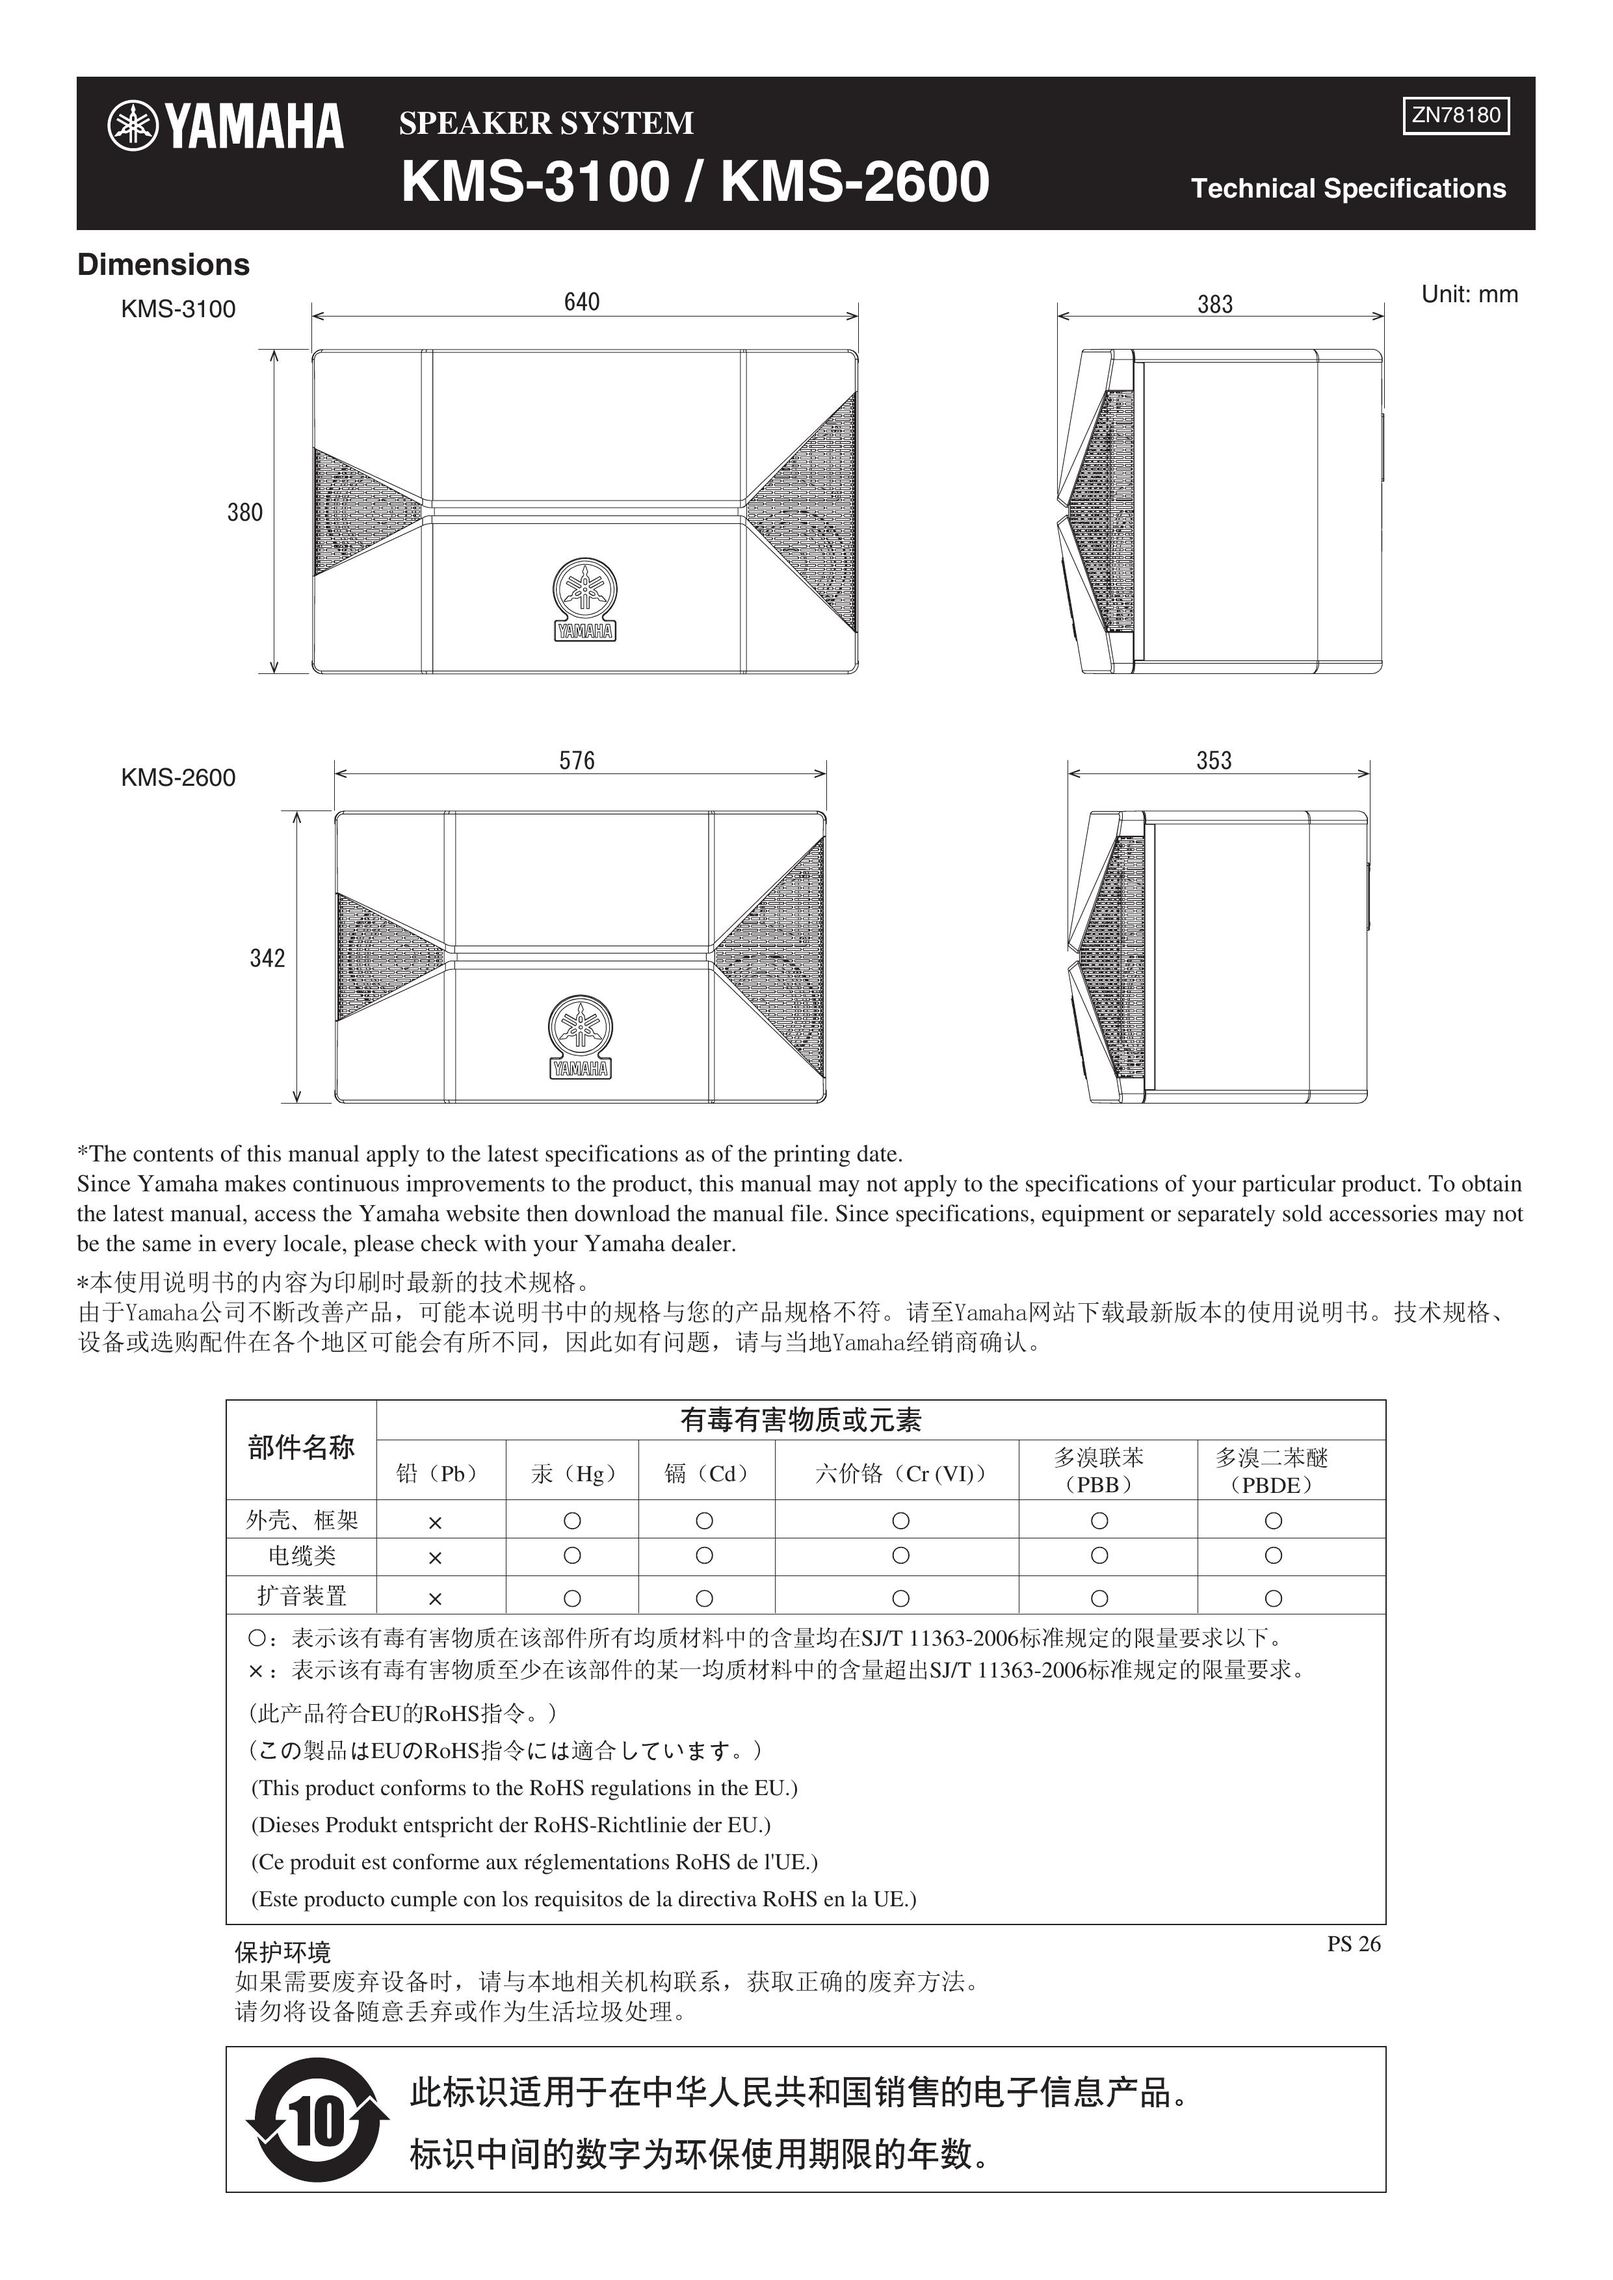 Yamaha KMS-2600 Home Theater System User Manual